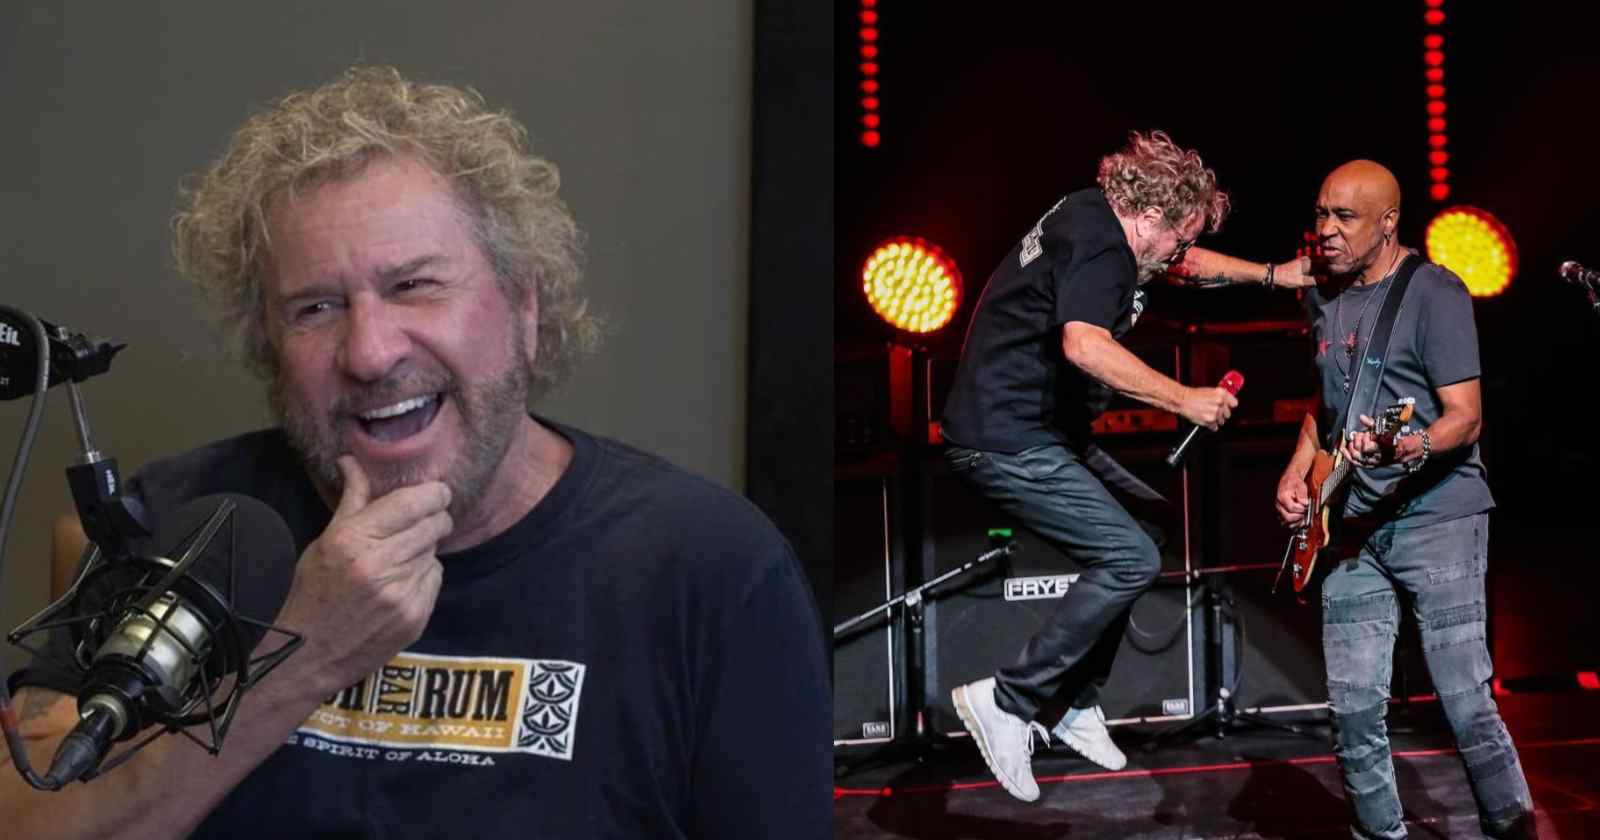 Sammy Hagar lists his 5 favorite songs to play live on current tour